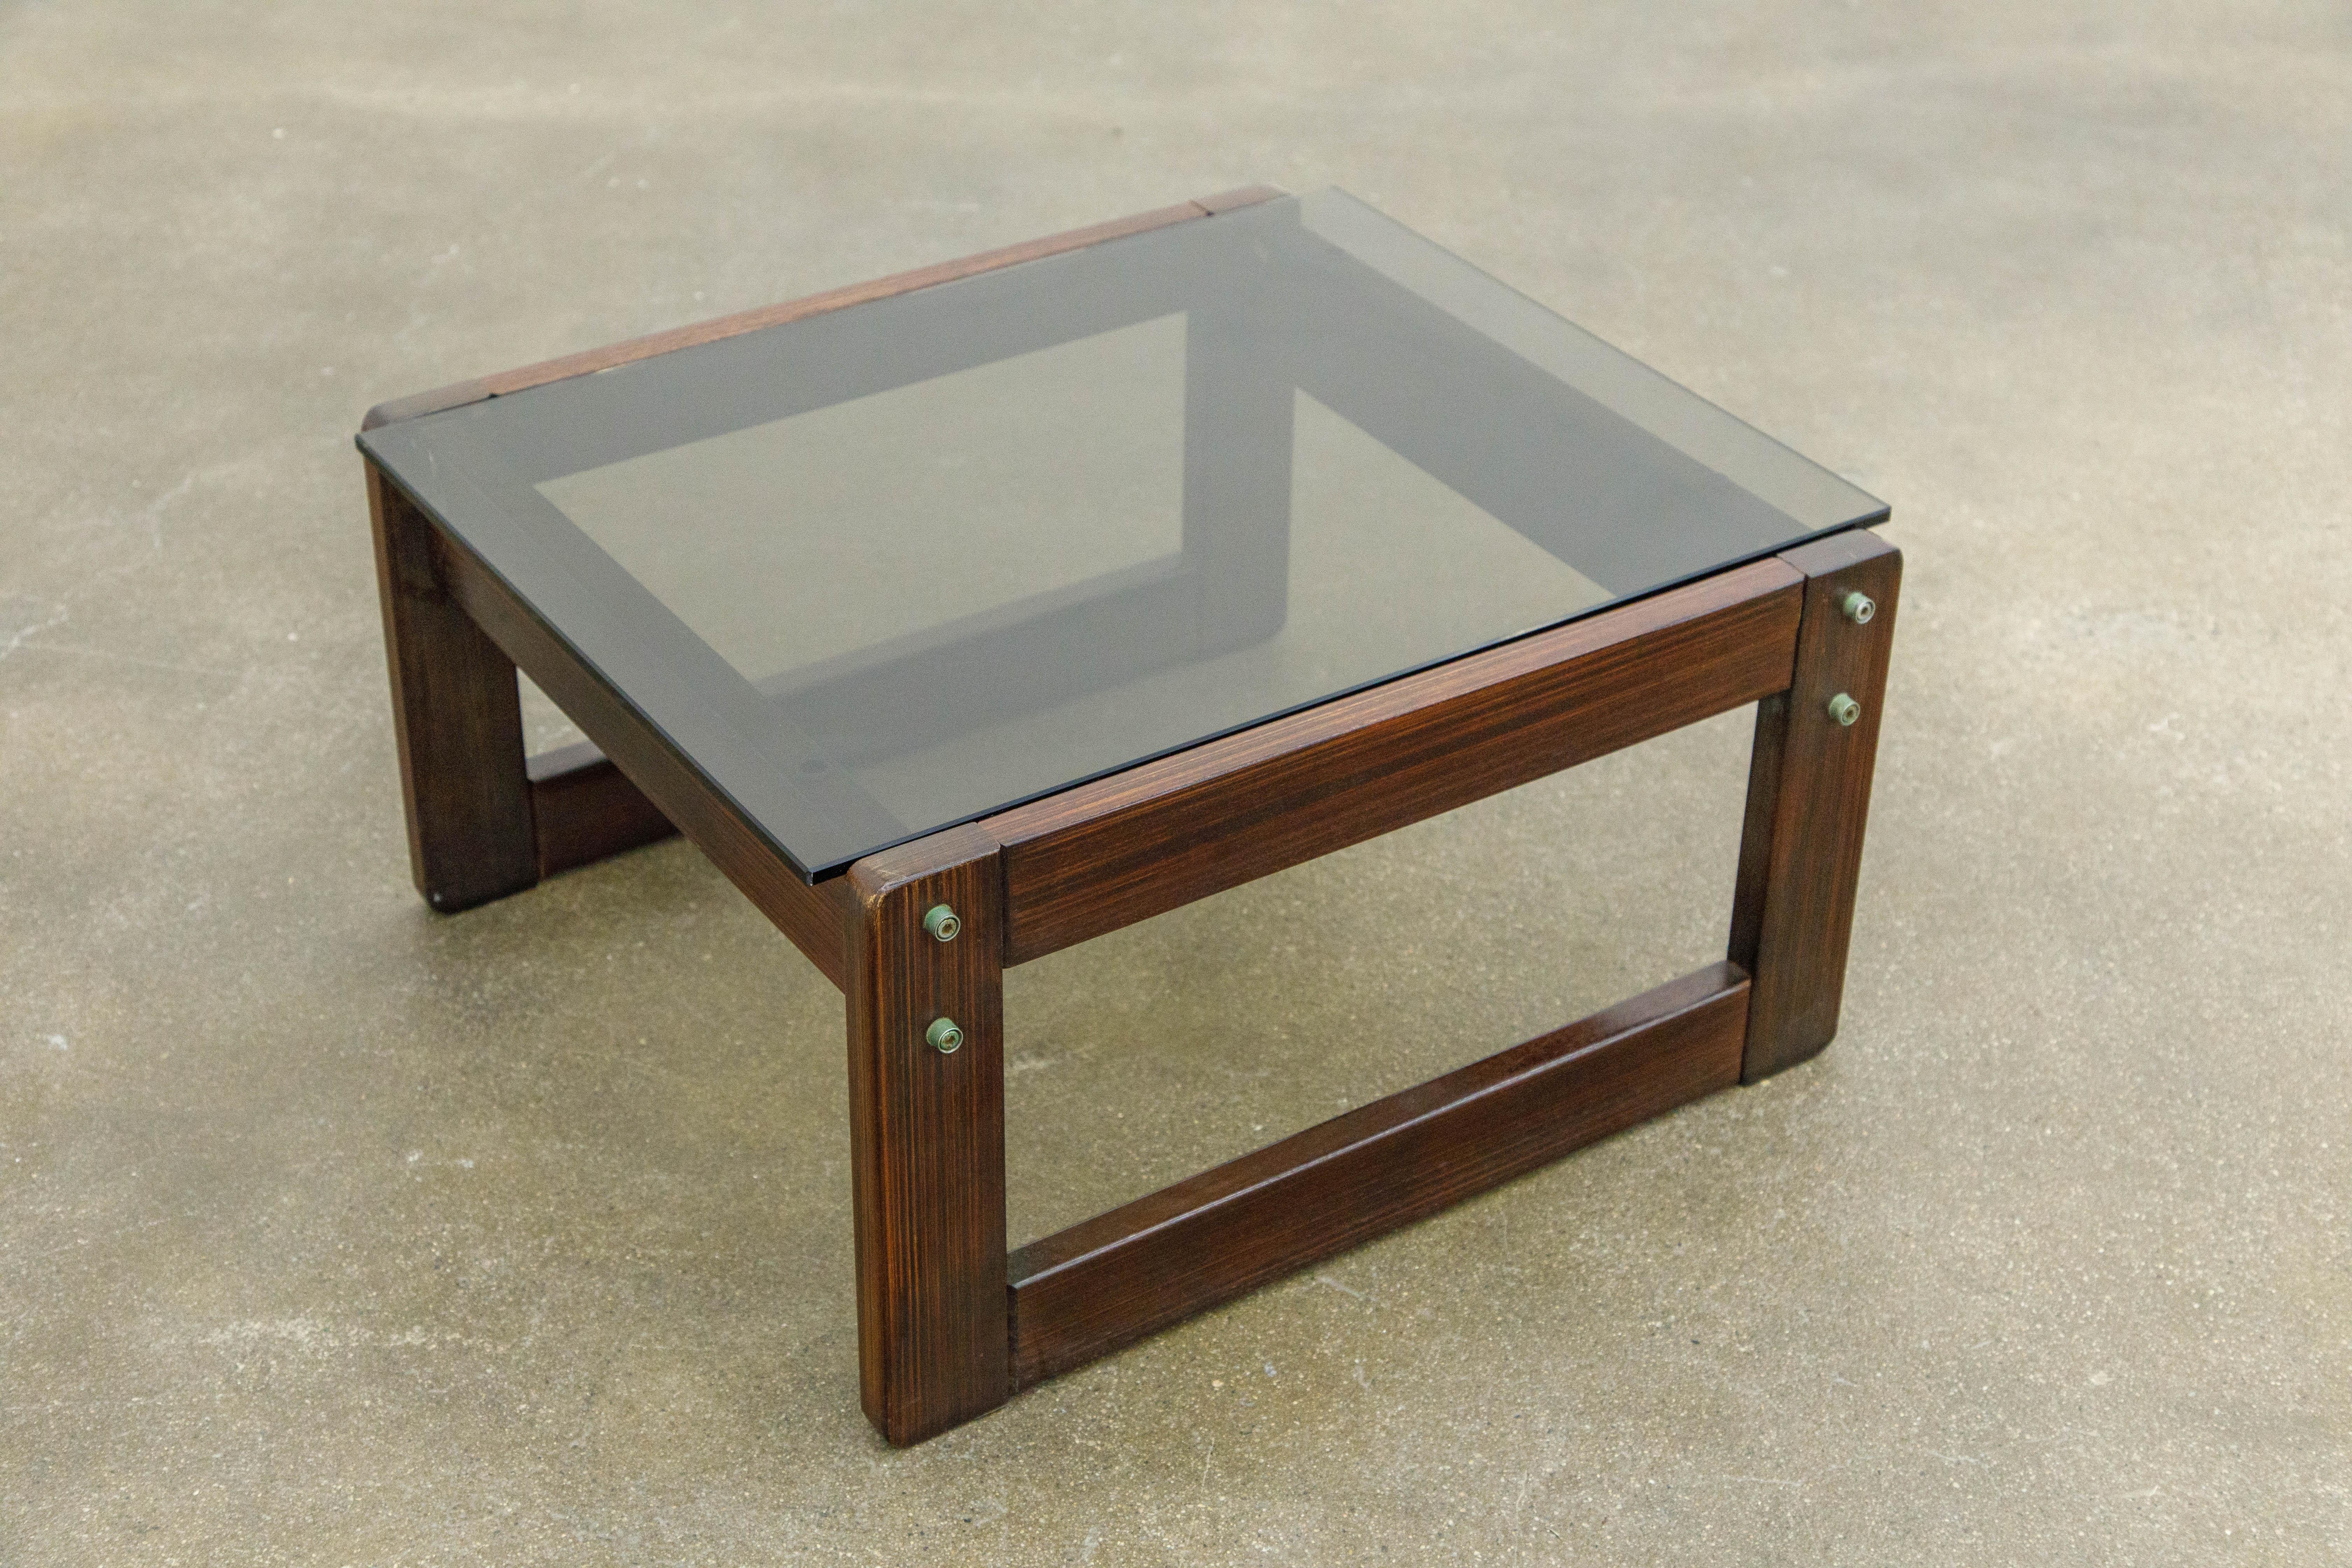 A beautiful Brazilian Rosewood and smoked glass side table by coveted designer Percival Lafer. This 1960s end table was made in Brazil and is signed with Lafer sticker label as seen in the photos. As rosewood is now an endangered species and